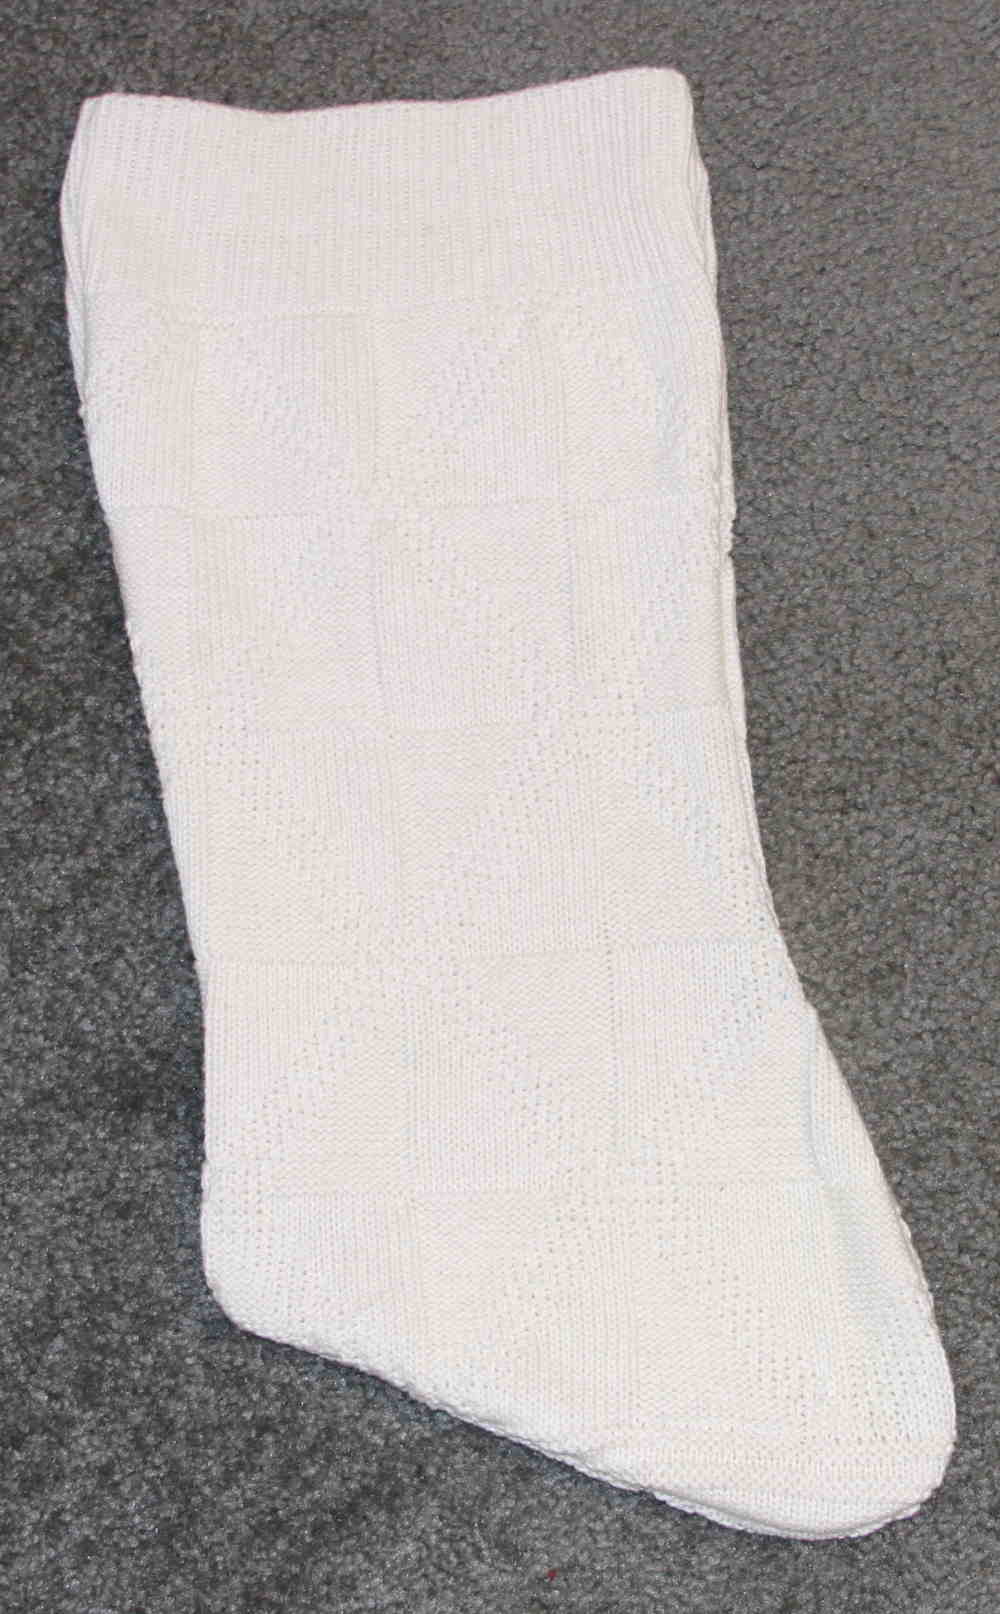 Sweater Stocking after cutting